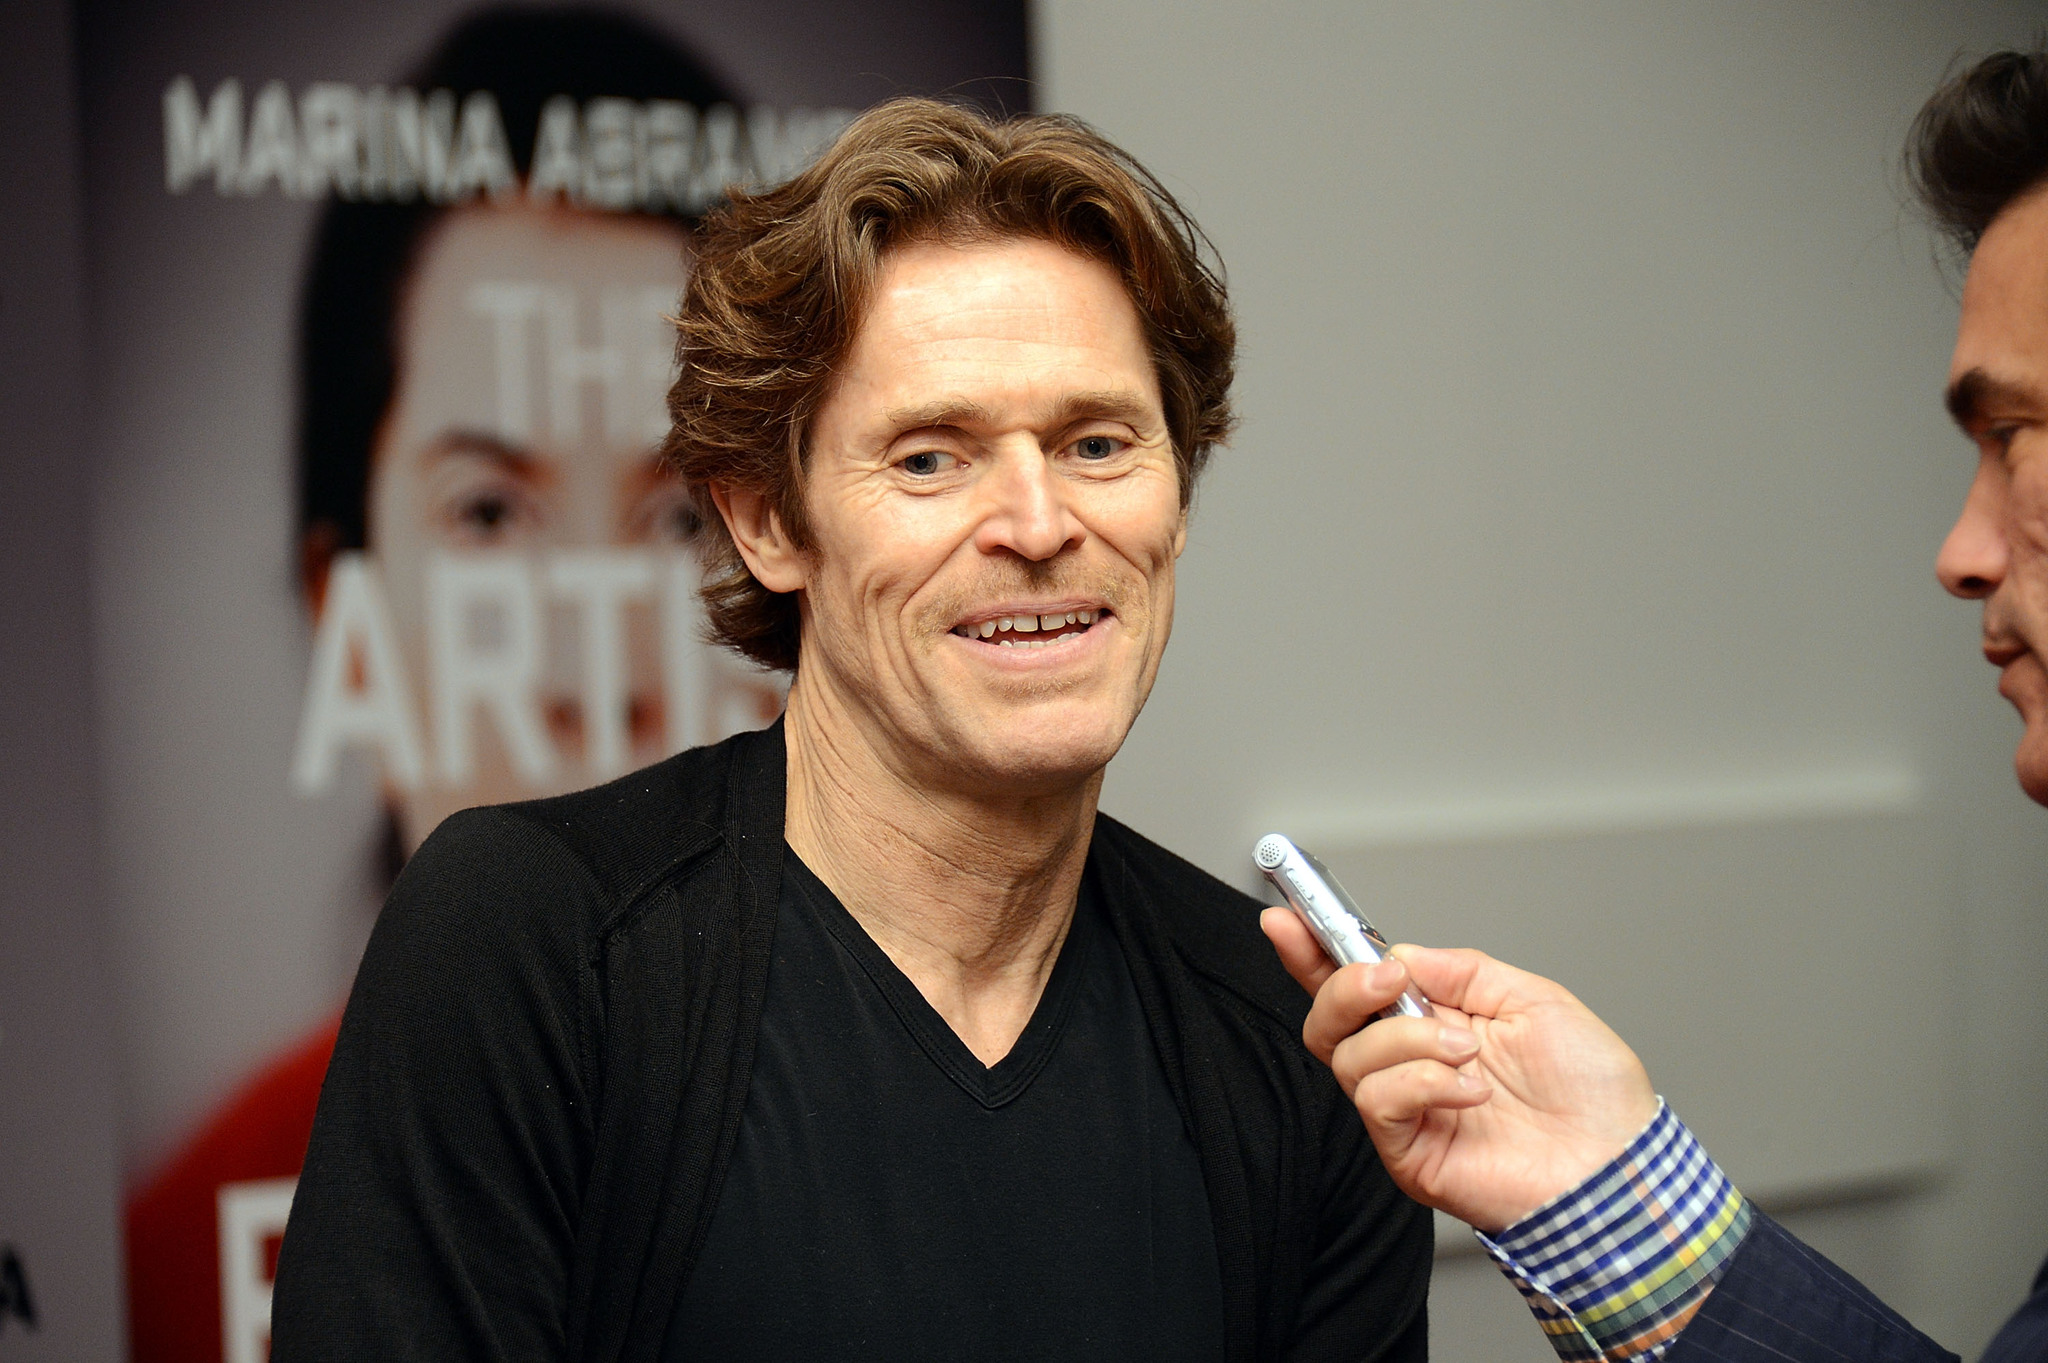 Willem Dafoe at event of Marina Abramovic: The Artist Is Present (2012)